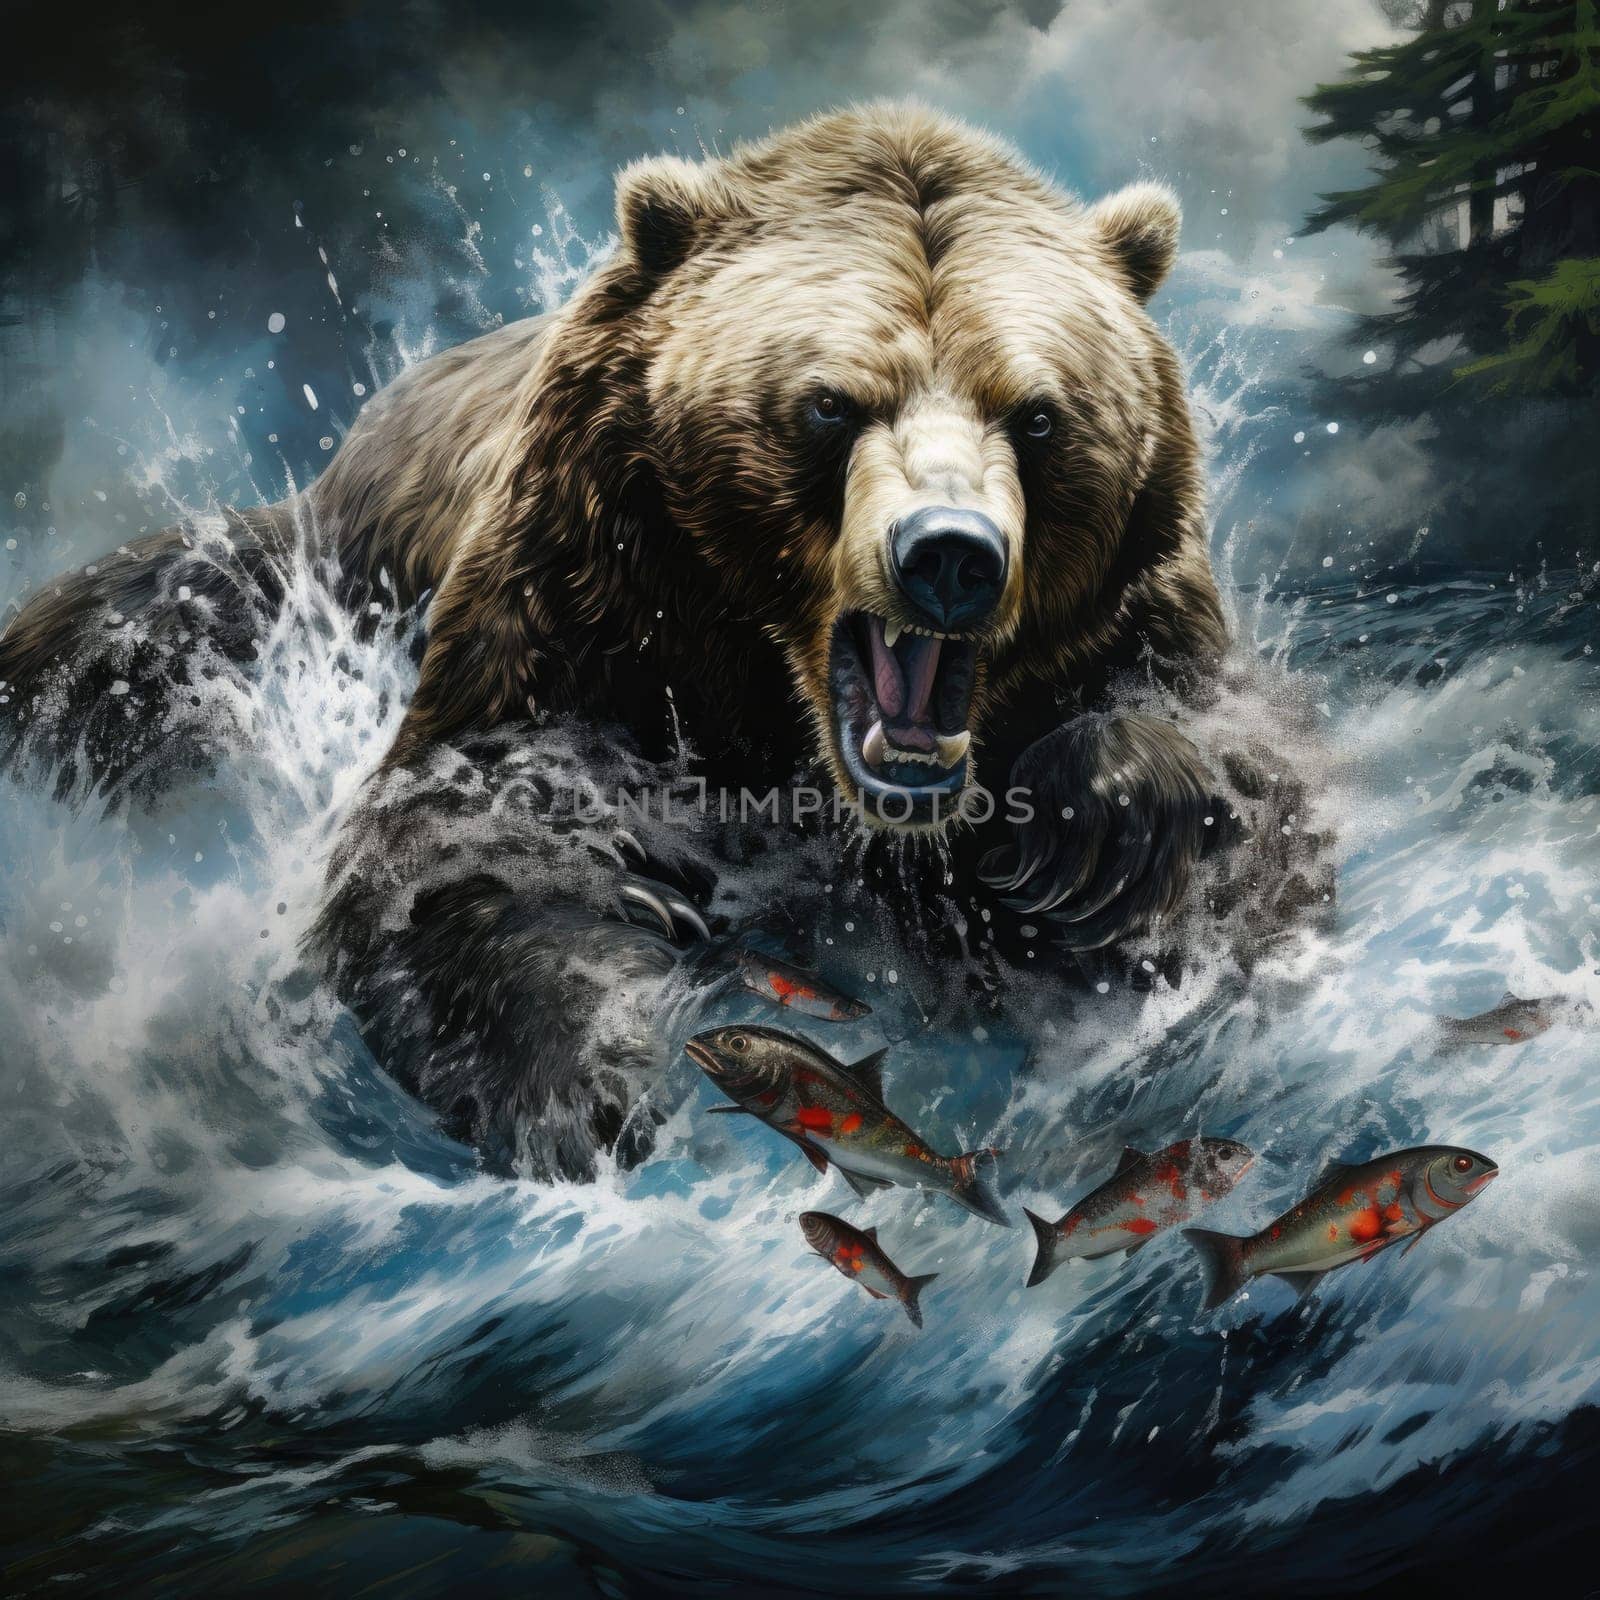 A painting depicts a bear standing in water, with fish swimming around it.